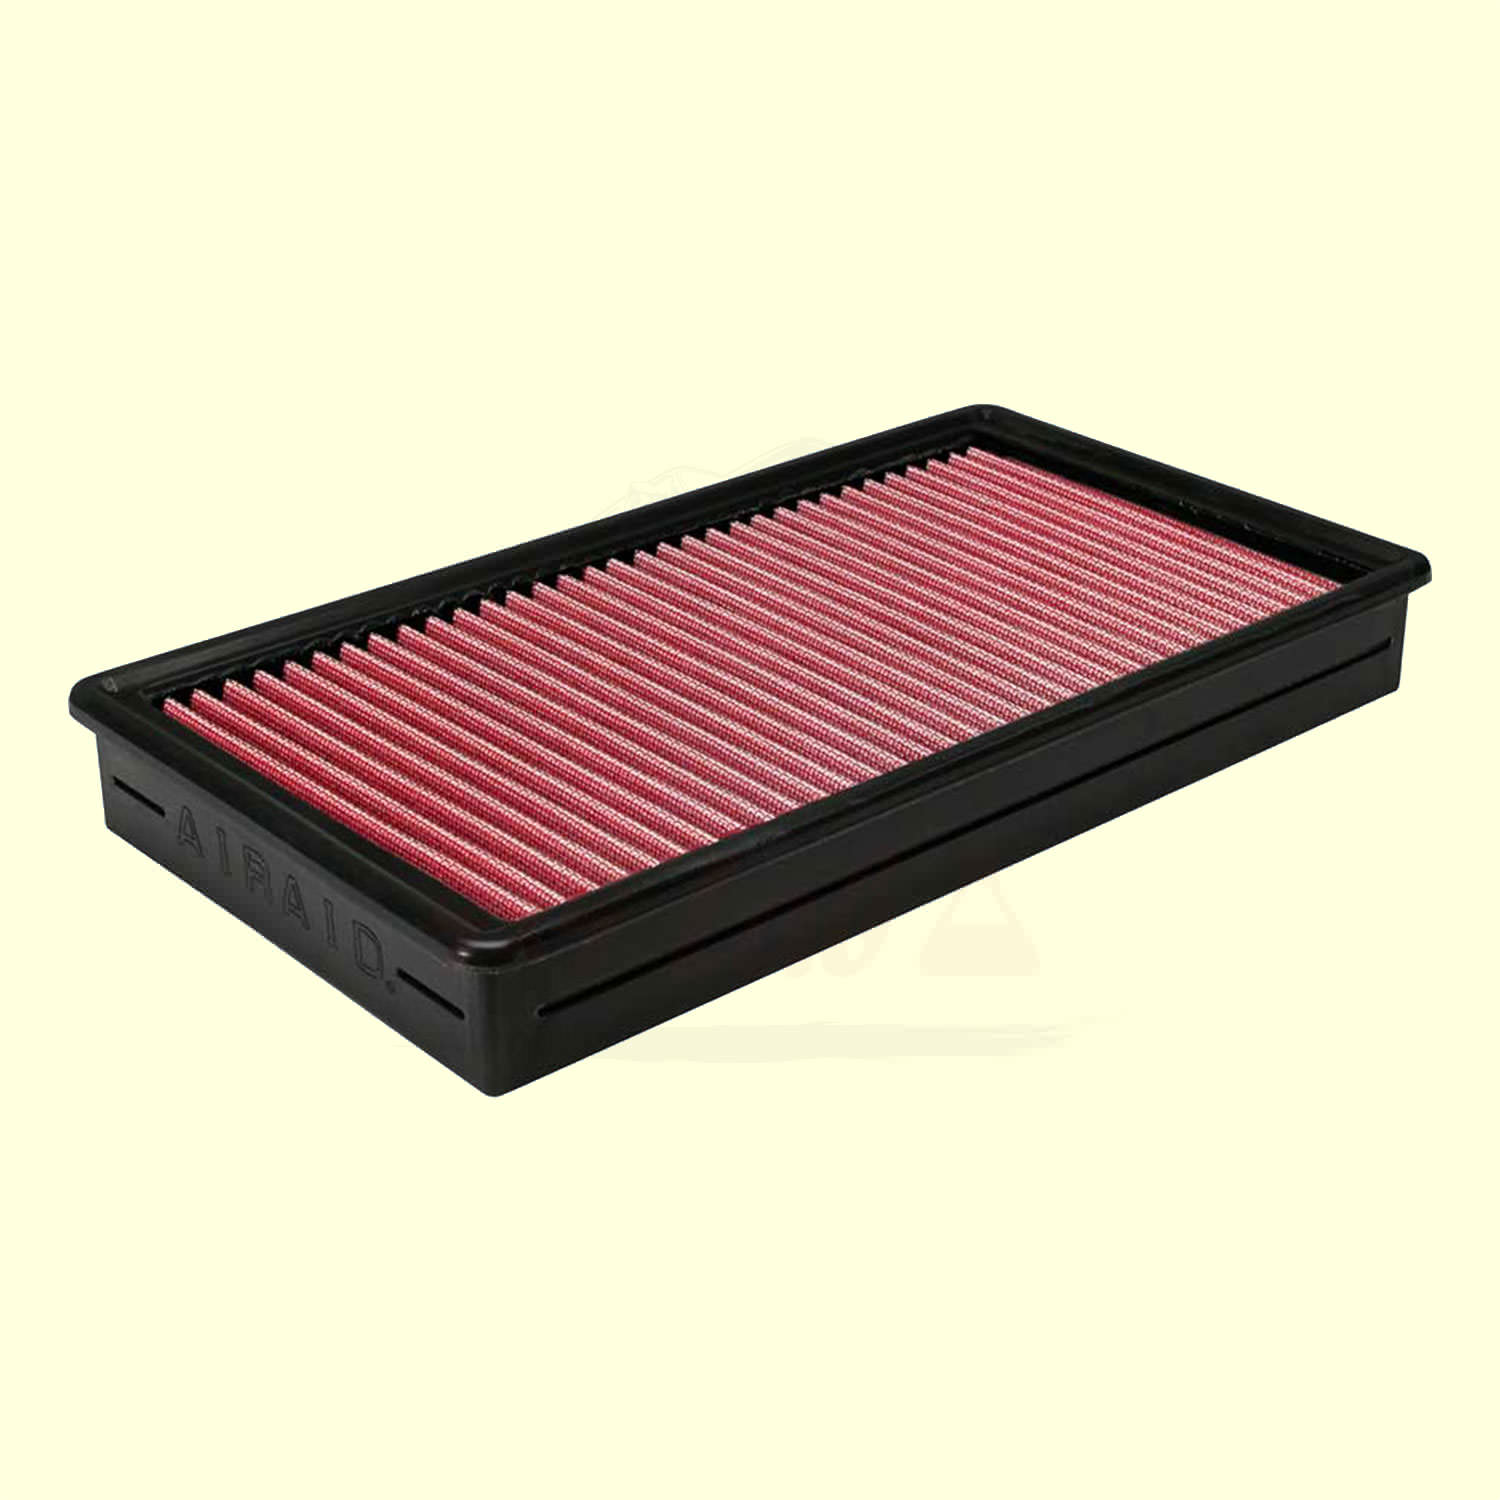 Replacement Dry Air Filter for Jeep Grand Cherokee 2005-2010 AIRAID | eBay 2005 Jeep Grand Cherokee Cabin Air Filter